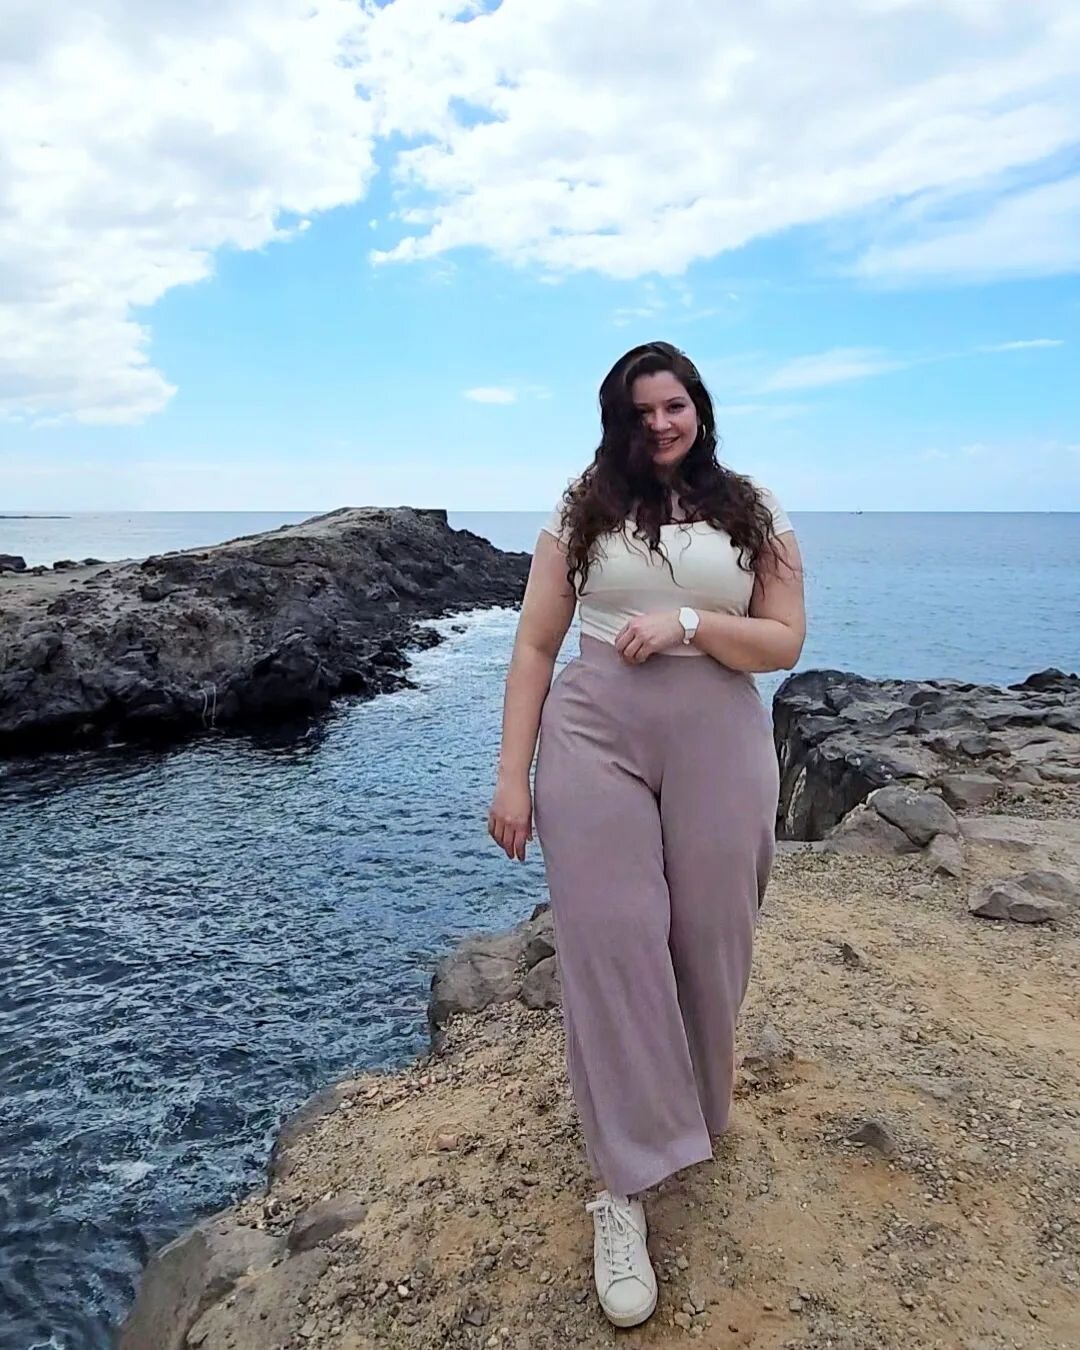 First day in #Tenerife, I spontaneously jumped on a bus to Los Cristianos town while I was walking to explore the coast of Adeje. Here are some of my favorite moments from the day, especially from the cliff at the end of the beach, where my phone alm